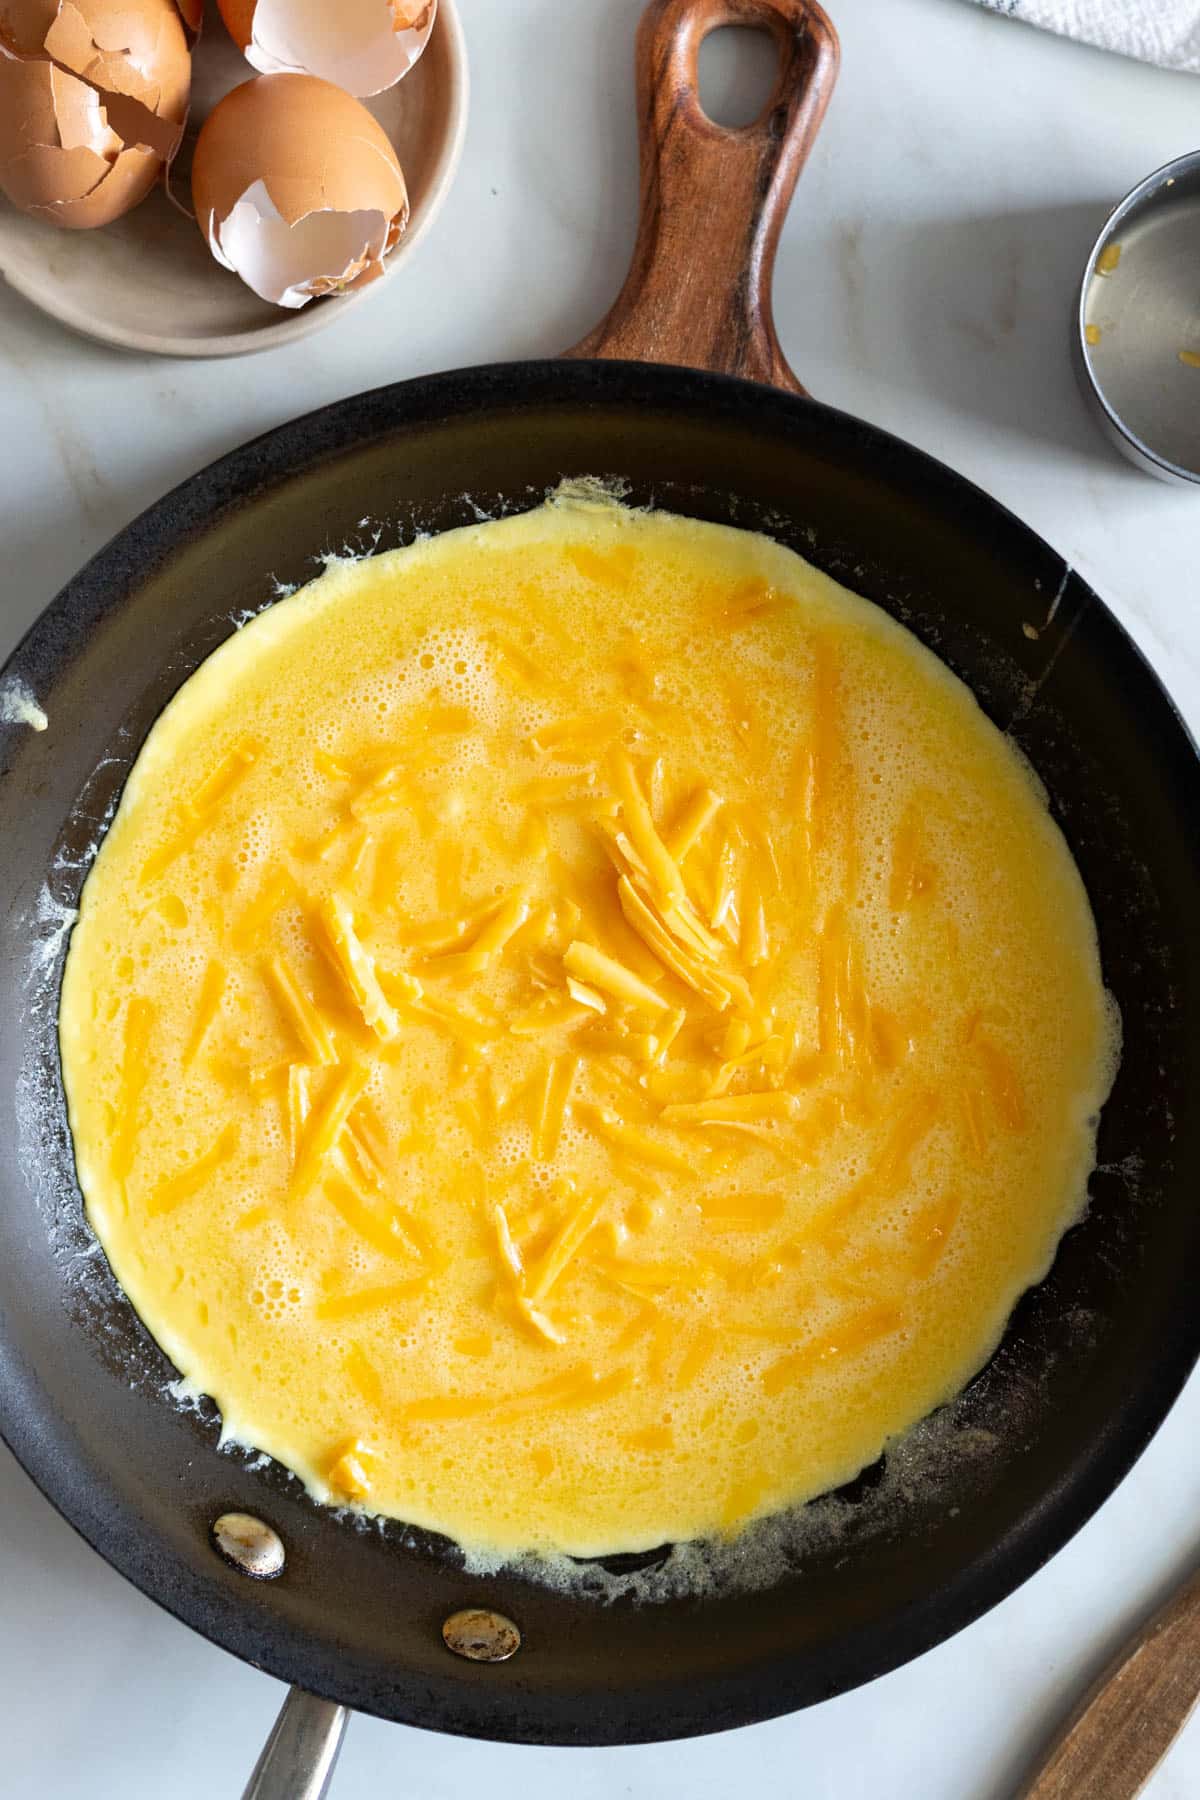 Cheddar cheese on eggs.